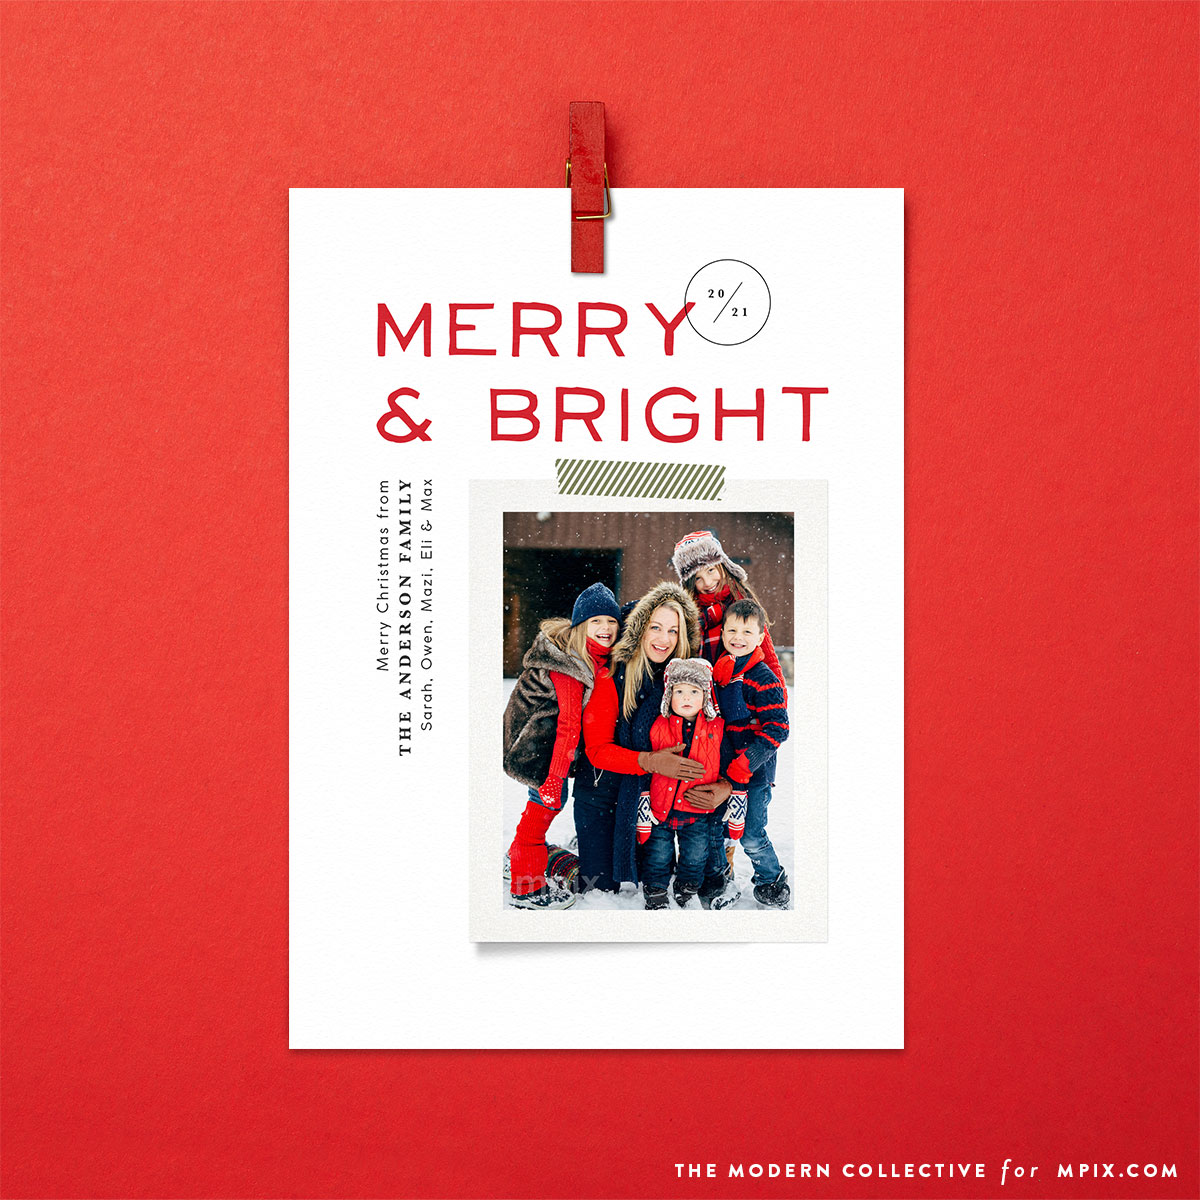 Merry & Bright Christmas Card from The Modern Collective for Mpix.com